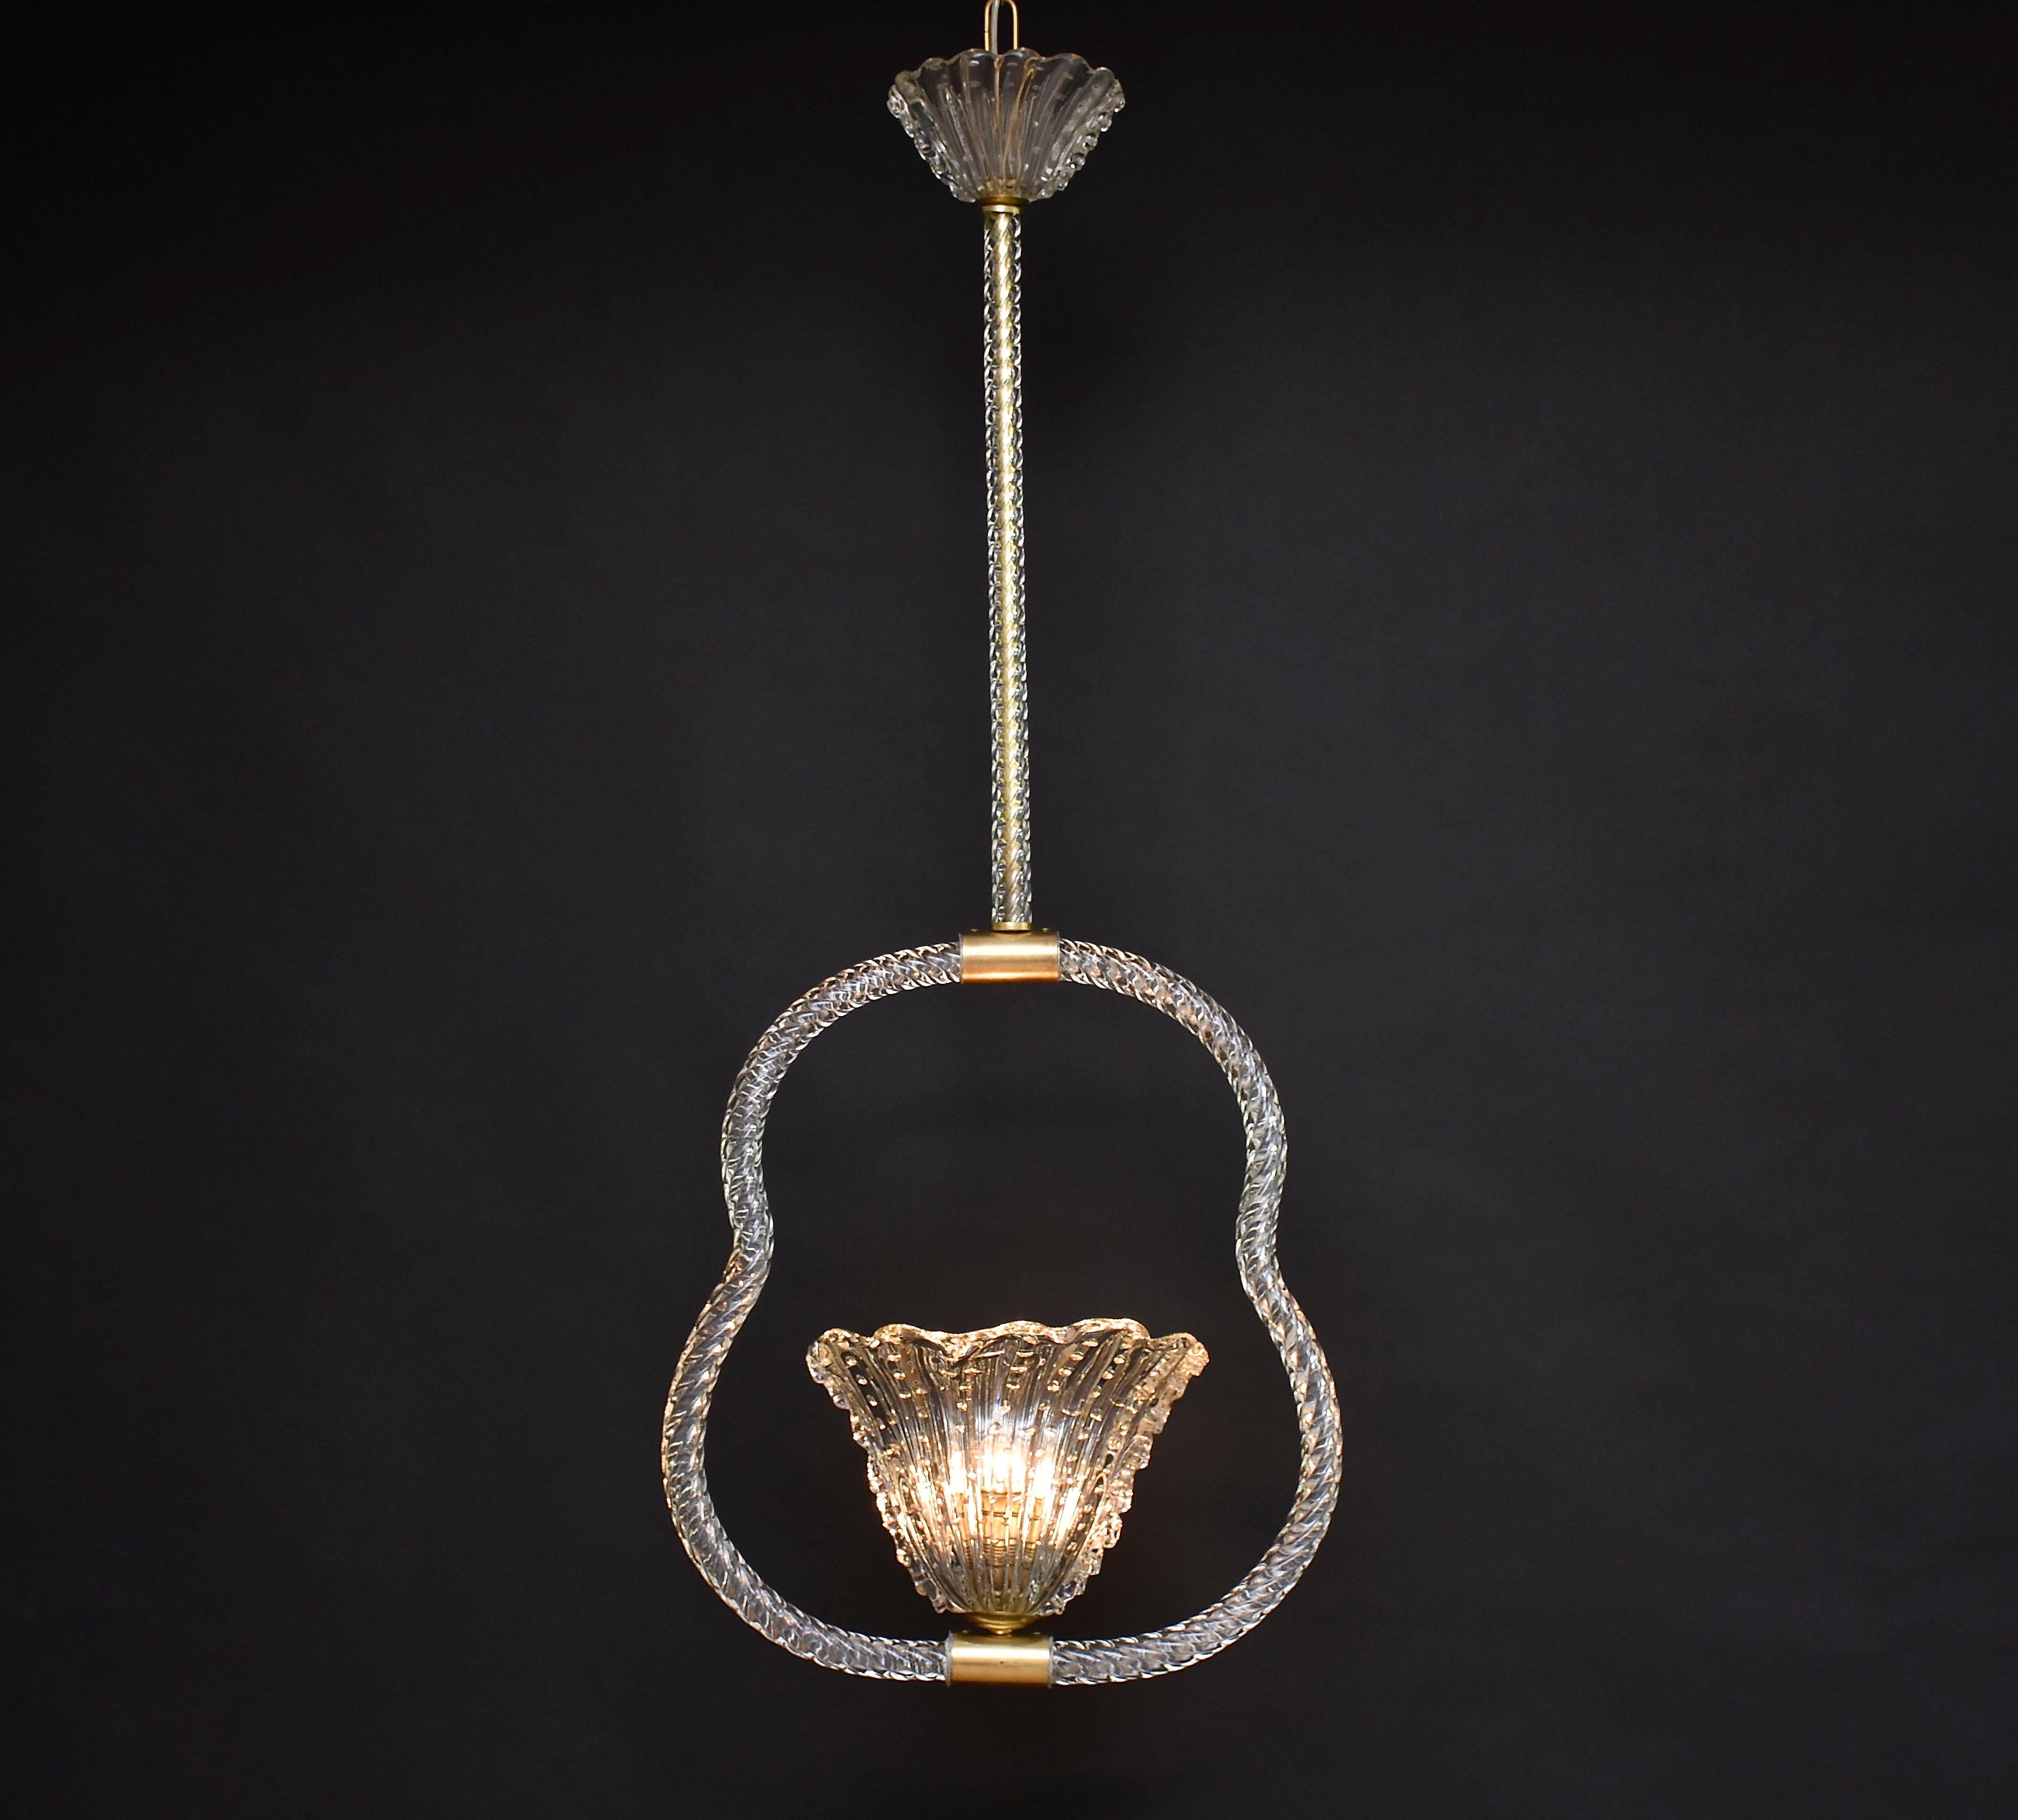 Beautiful Murano glass chandelier designed by the legendary company Barovier & Toso- master glassmaker!
The chandelier is made in transparent twisted Venetian crystal with brass elements and in the centre a blown glass vase with one light.
A unique